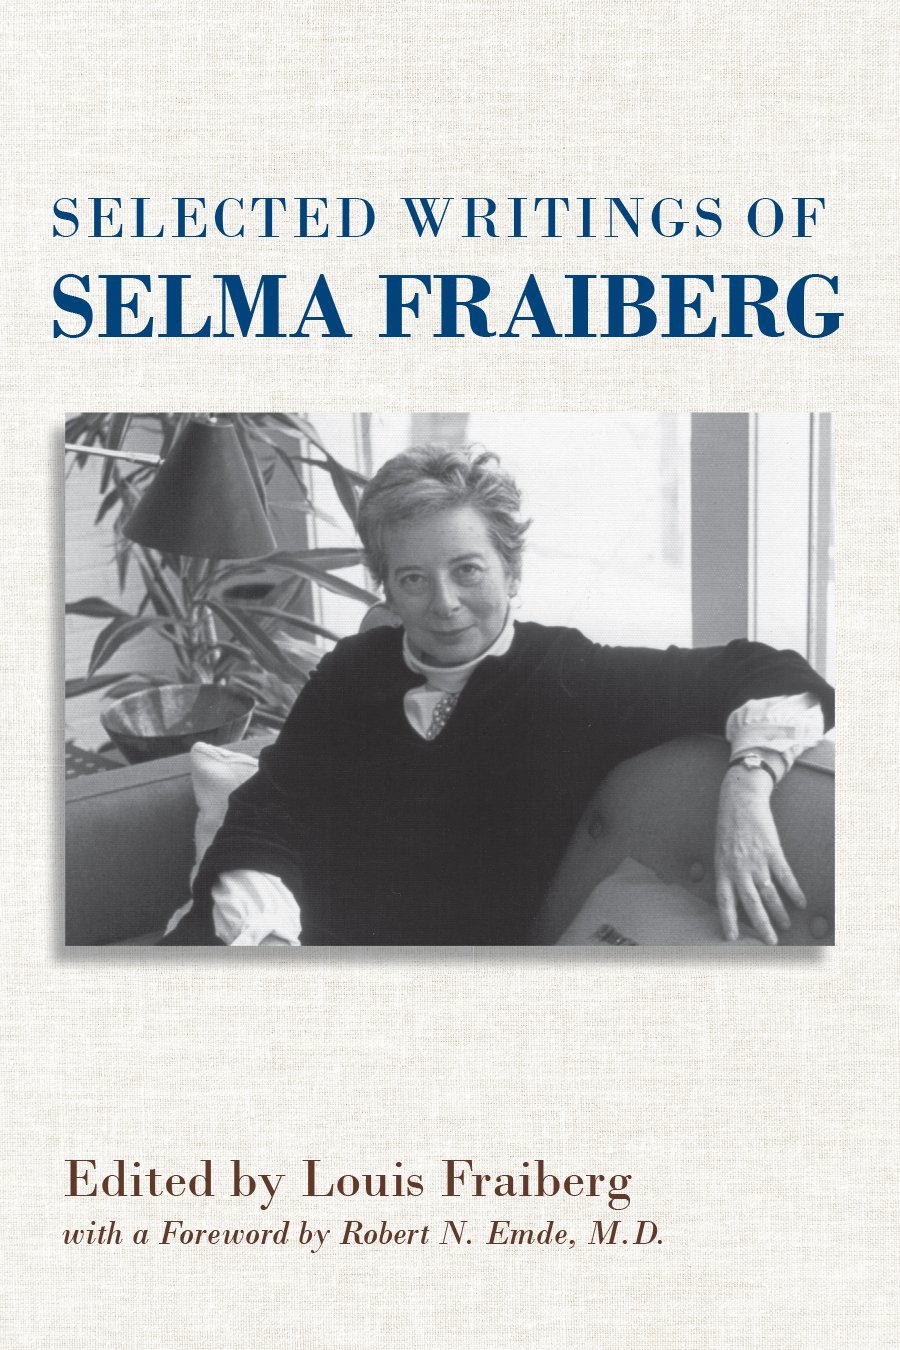 Front cover of Selected Writings of Selma Fraiberg, Edited by Louis Fraiberg, featuring a black and white photograph of the author sitting next to potted plants.